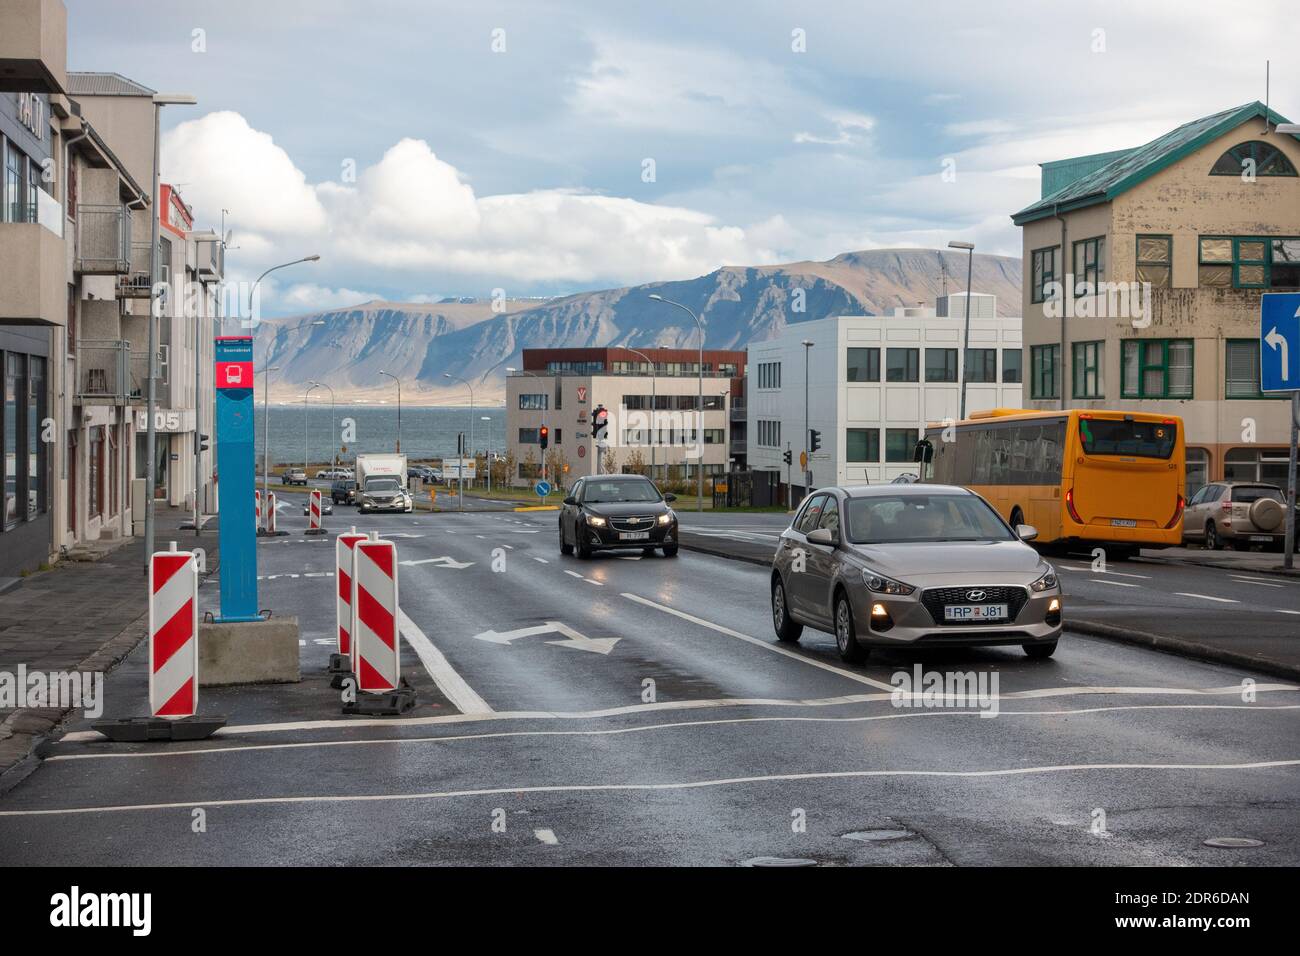 Snorrabraut  Street In Reykjavík With Videy Island In The Background Public Bus And Private Cars, The Ocean In Kollafjordur Bay Stock Photo